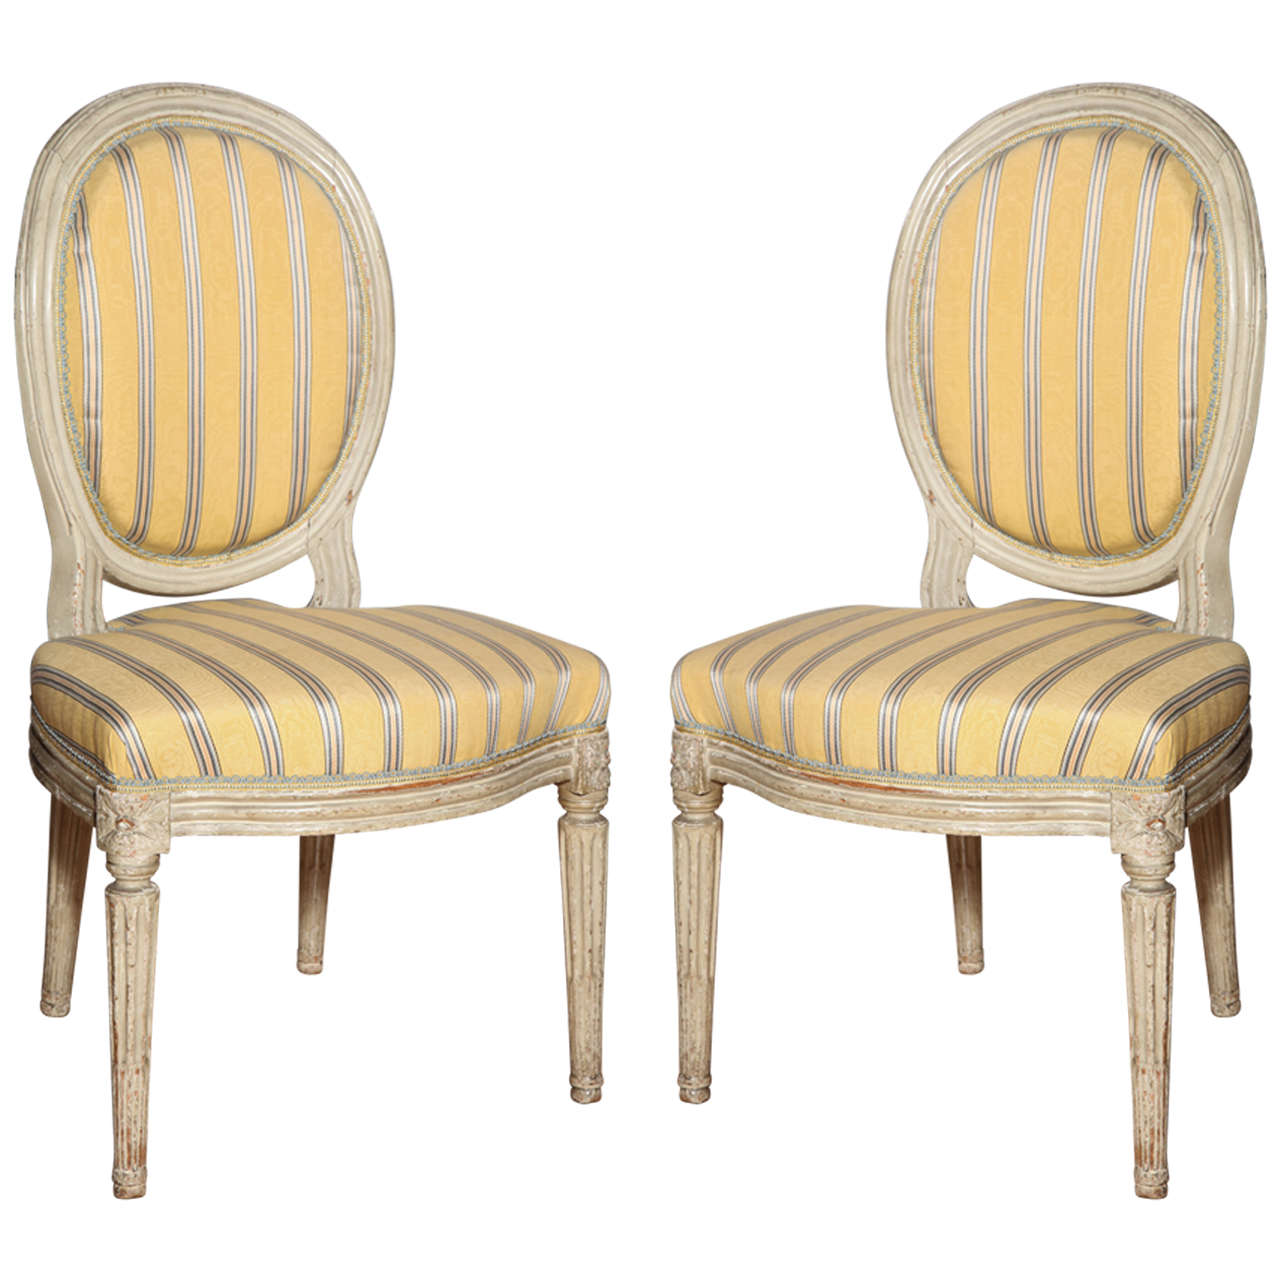 Pair of Carved and Painted Louis XVI Chairs, France, 18th Century For Sale